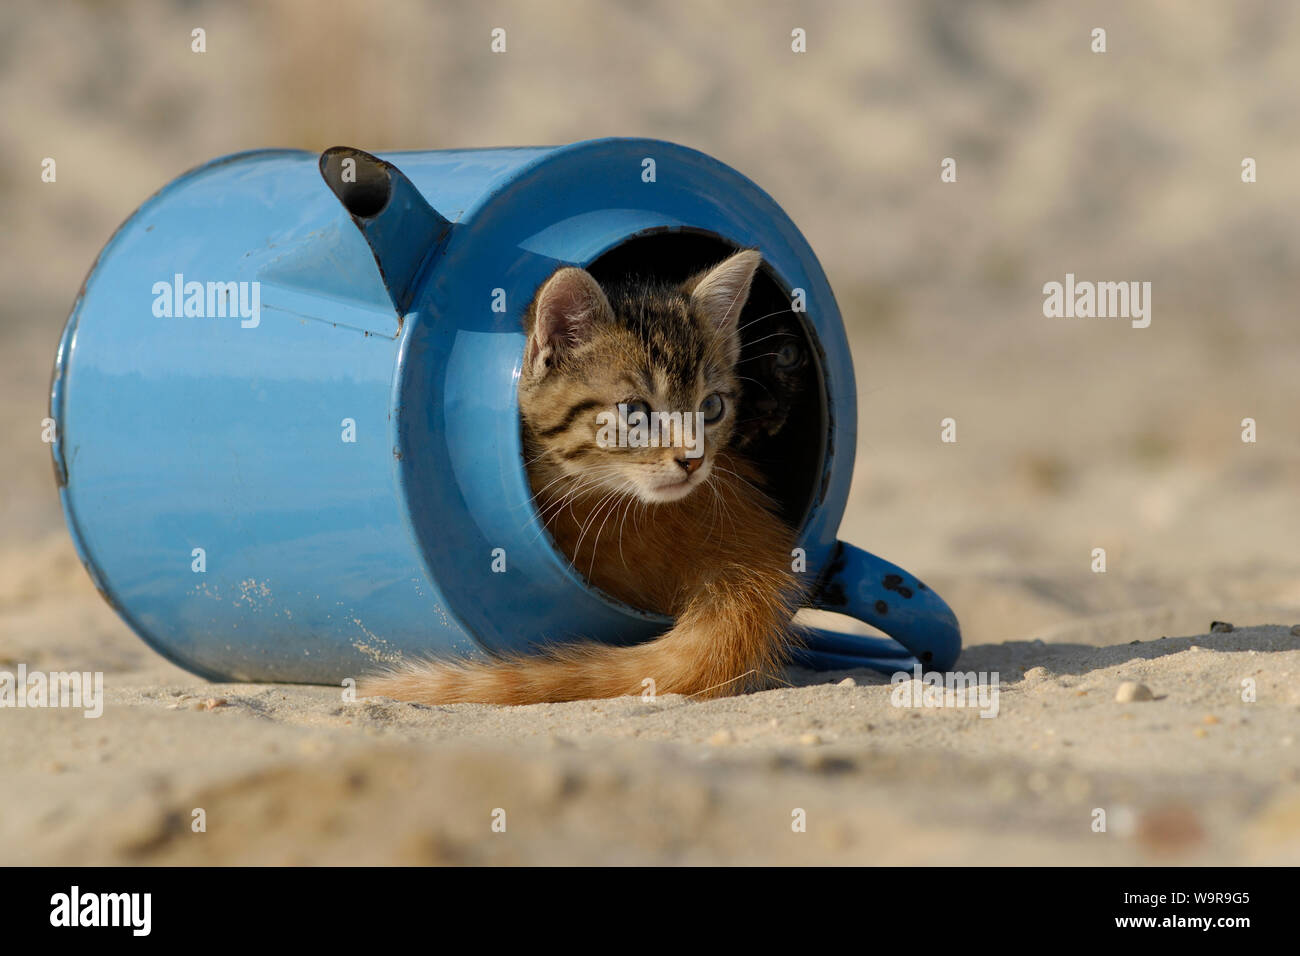 Domestic cats, kittens in old blue watering can Stock Photo